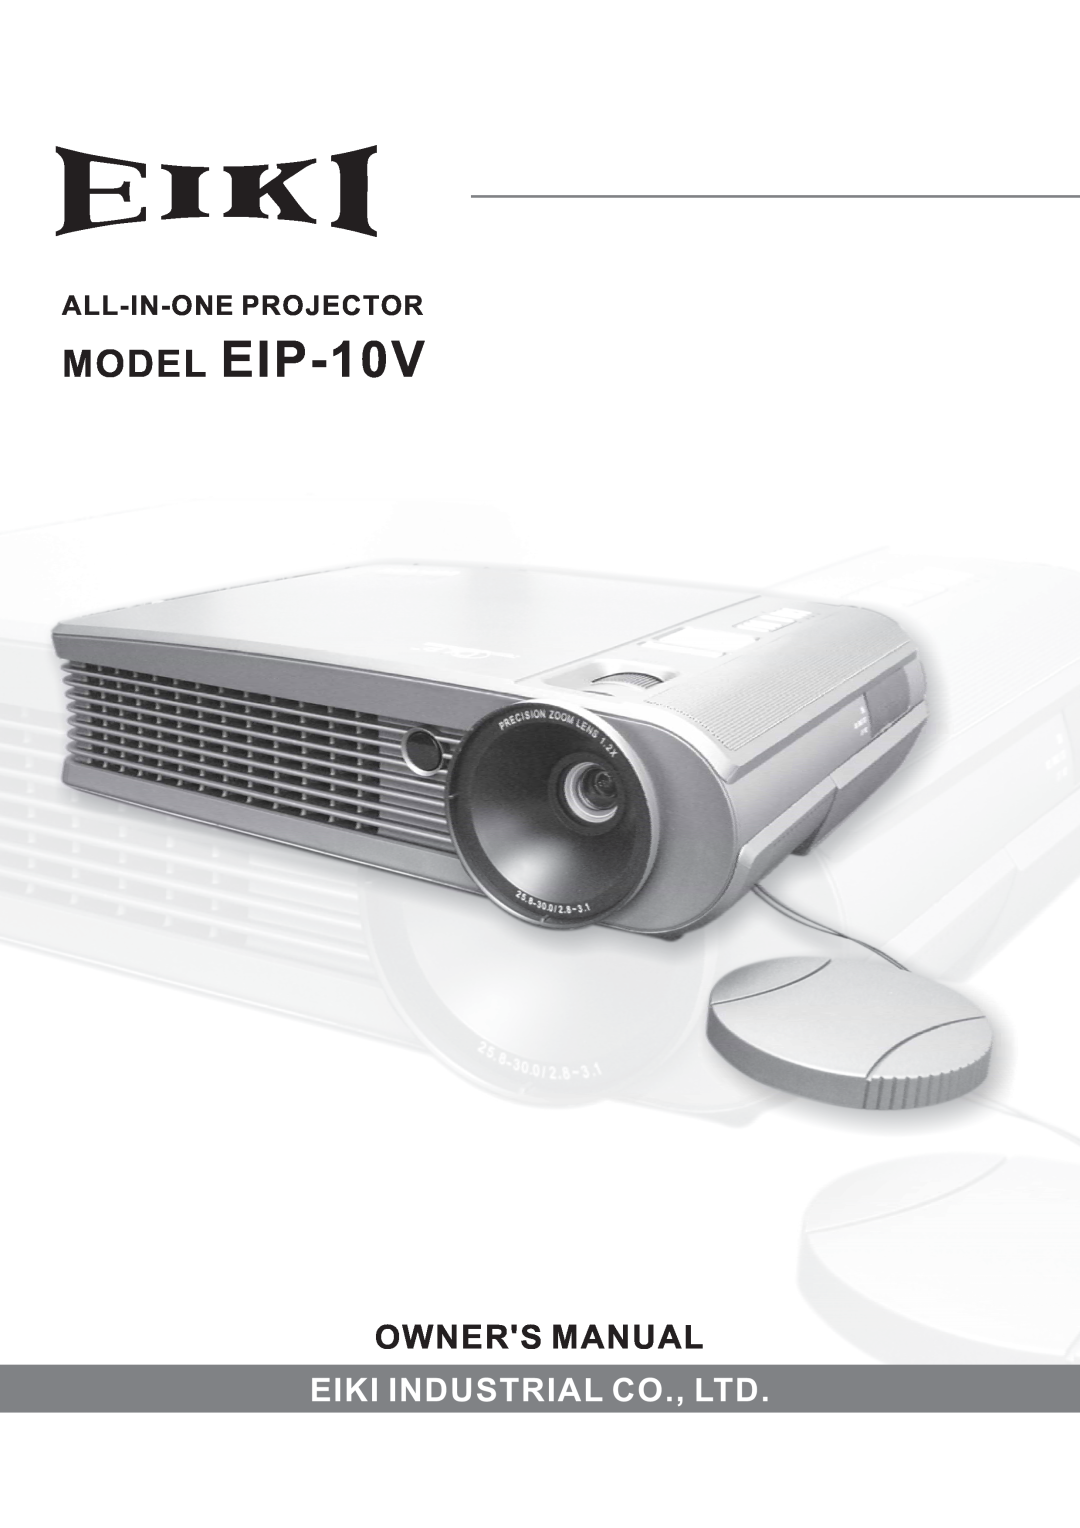 Eiki owner manual MODEL EIP-10V, All-In-One Projector 